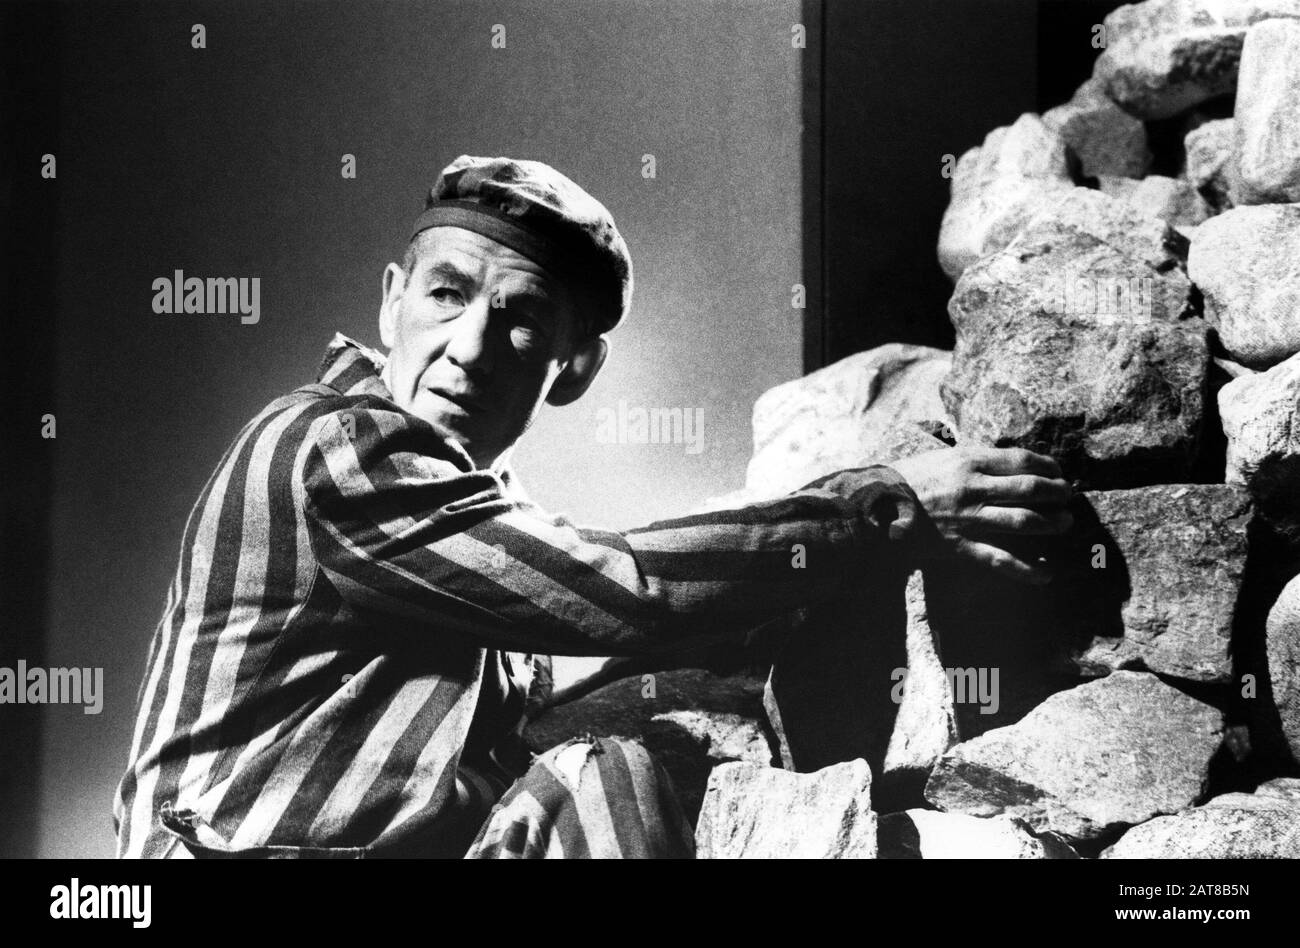 Ian McKellen (Max) in BENT by Martin Sherman directed by Sean Mathias at the Lyttelton Theatre, National Theatre (NT), London in 1990. Sir Ian Murray McKellen, born 1939, Burnley, England. English stage and film actor. Co-founder of Stonewall, gay rights activist, knighted in 1990, made a Companion of Honour 2007. Stock Photo